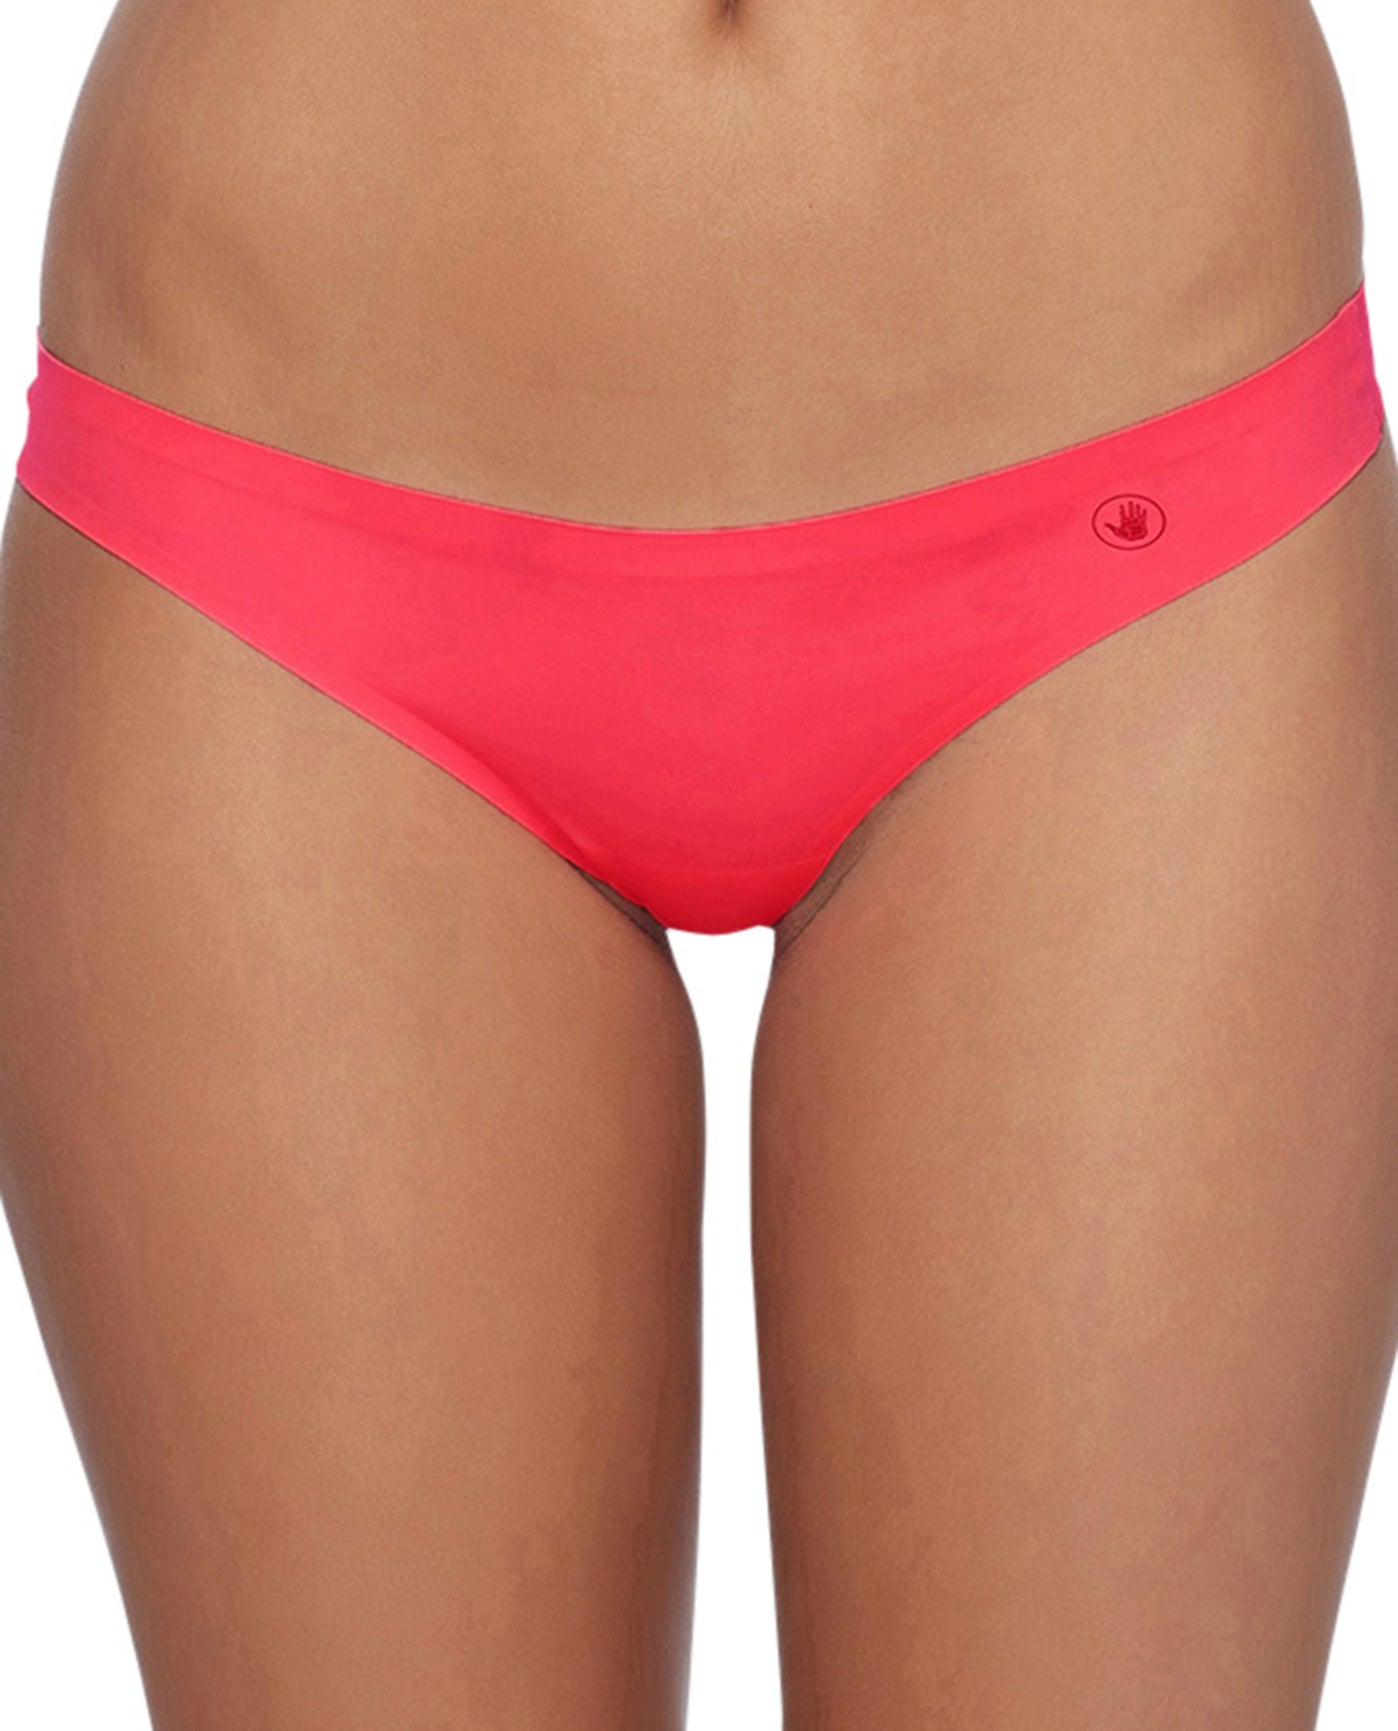 Front View Of Body Glove Sport Seamless Thong Panty | BGS Diva